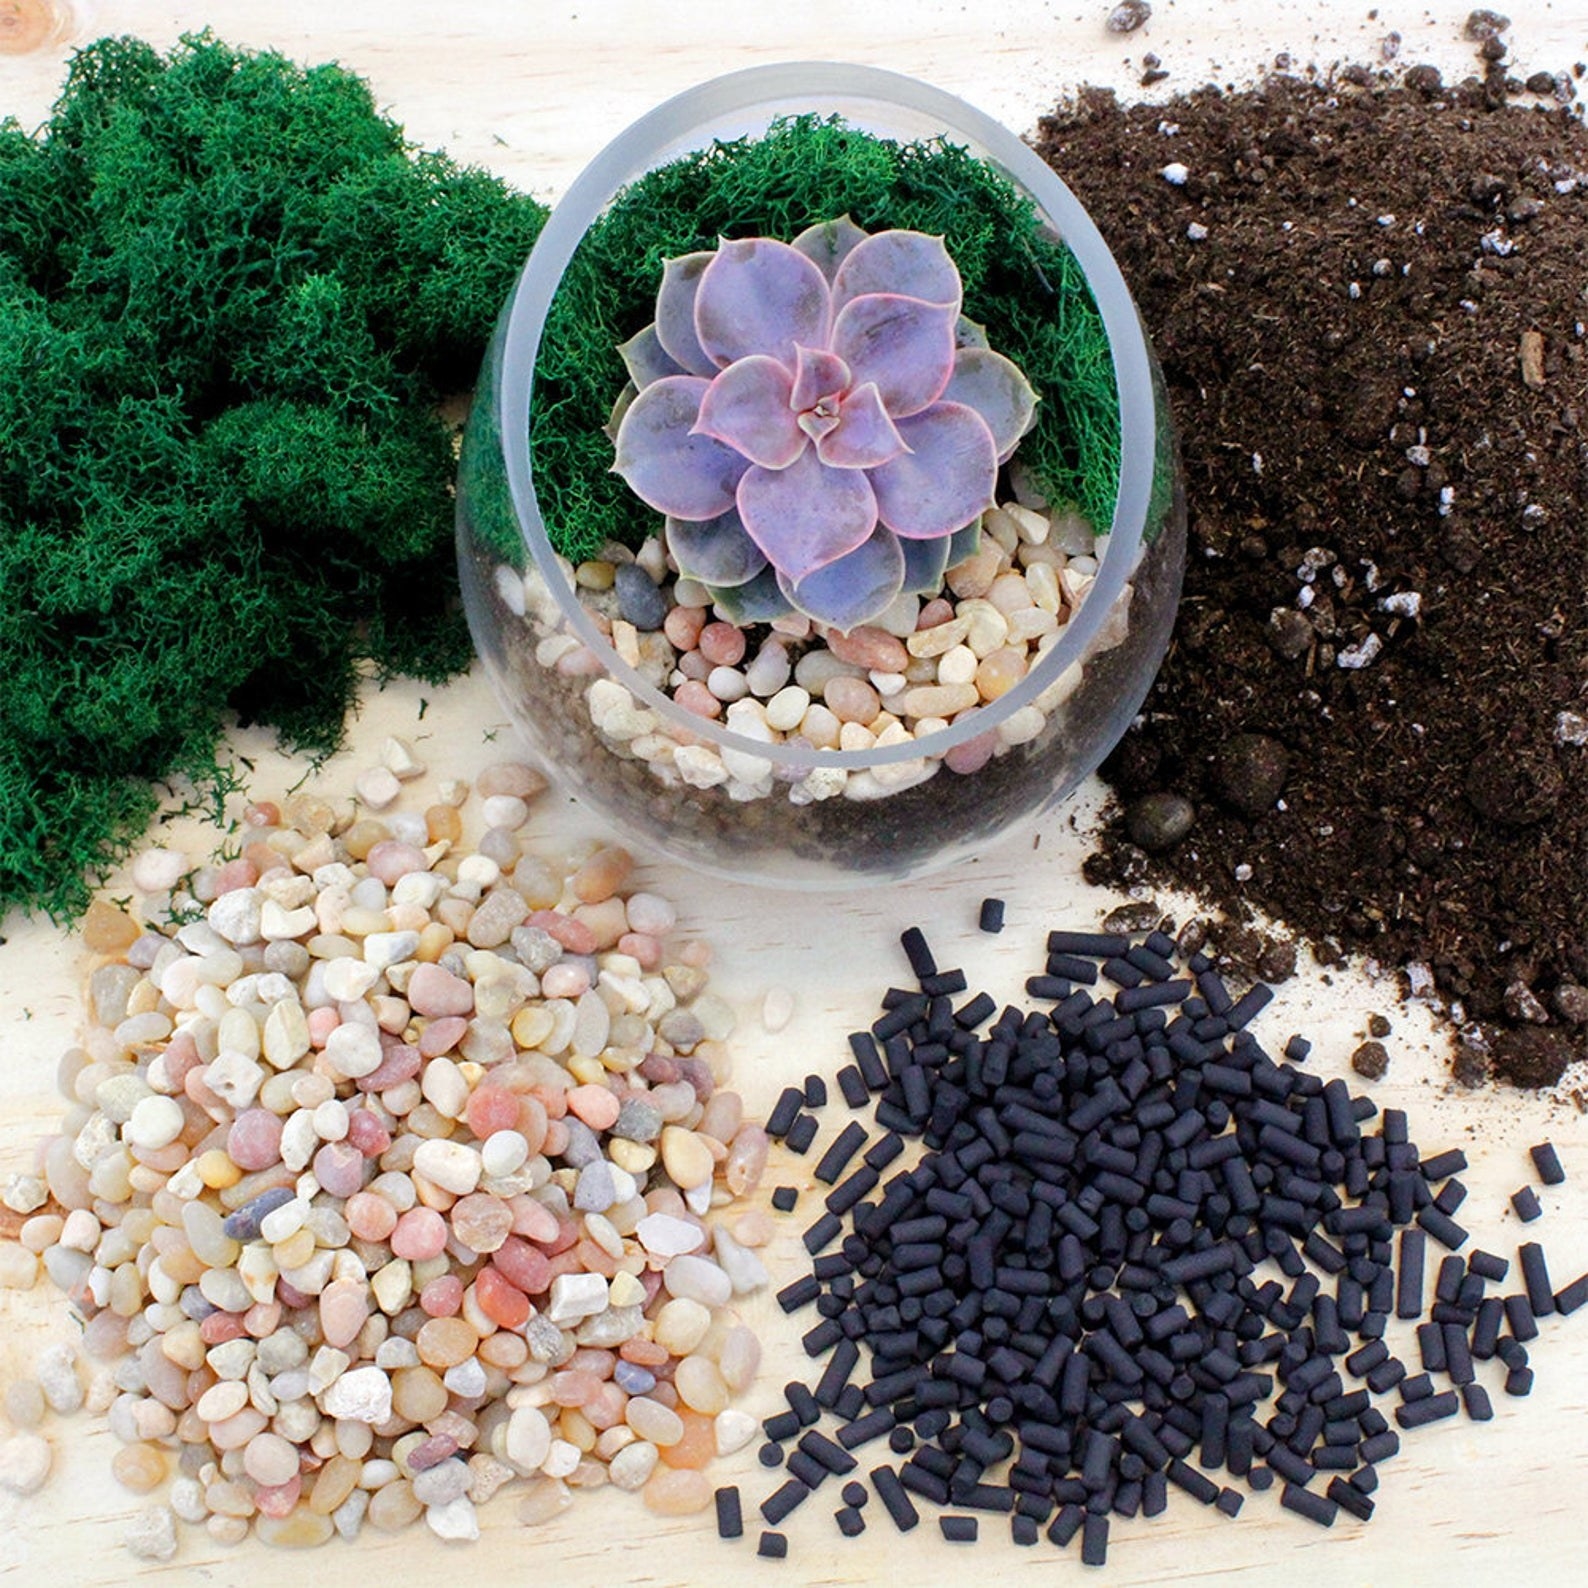 The contents laid out, including moss, soil, light rocks, and carbon